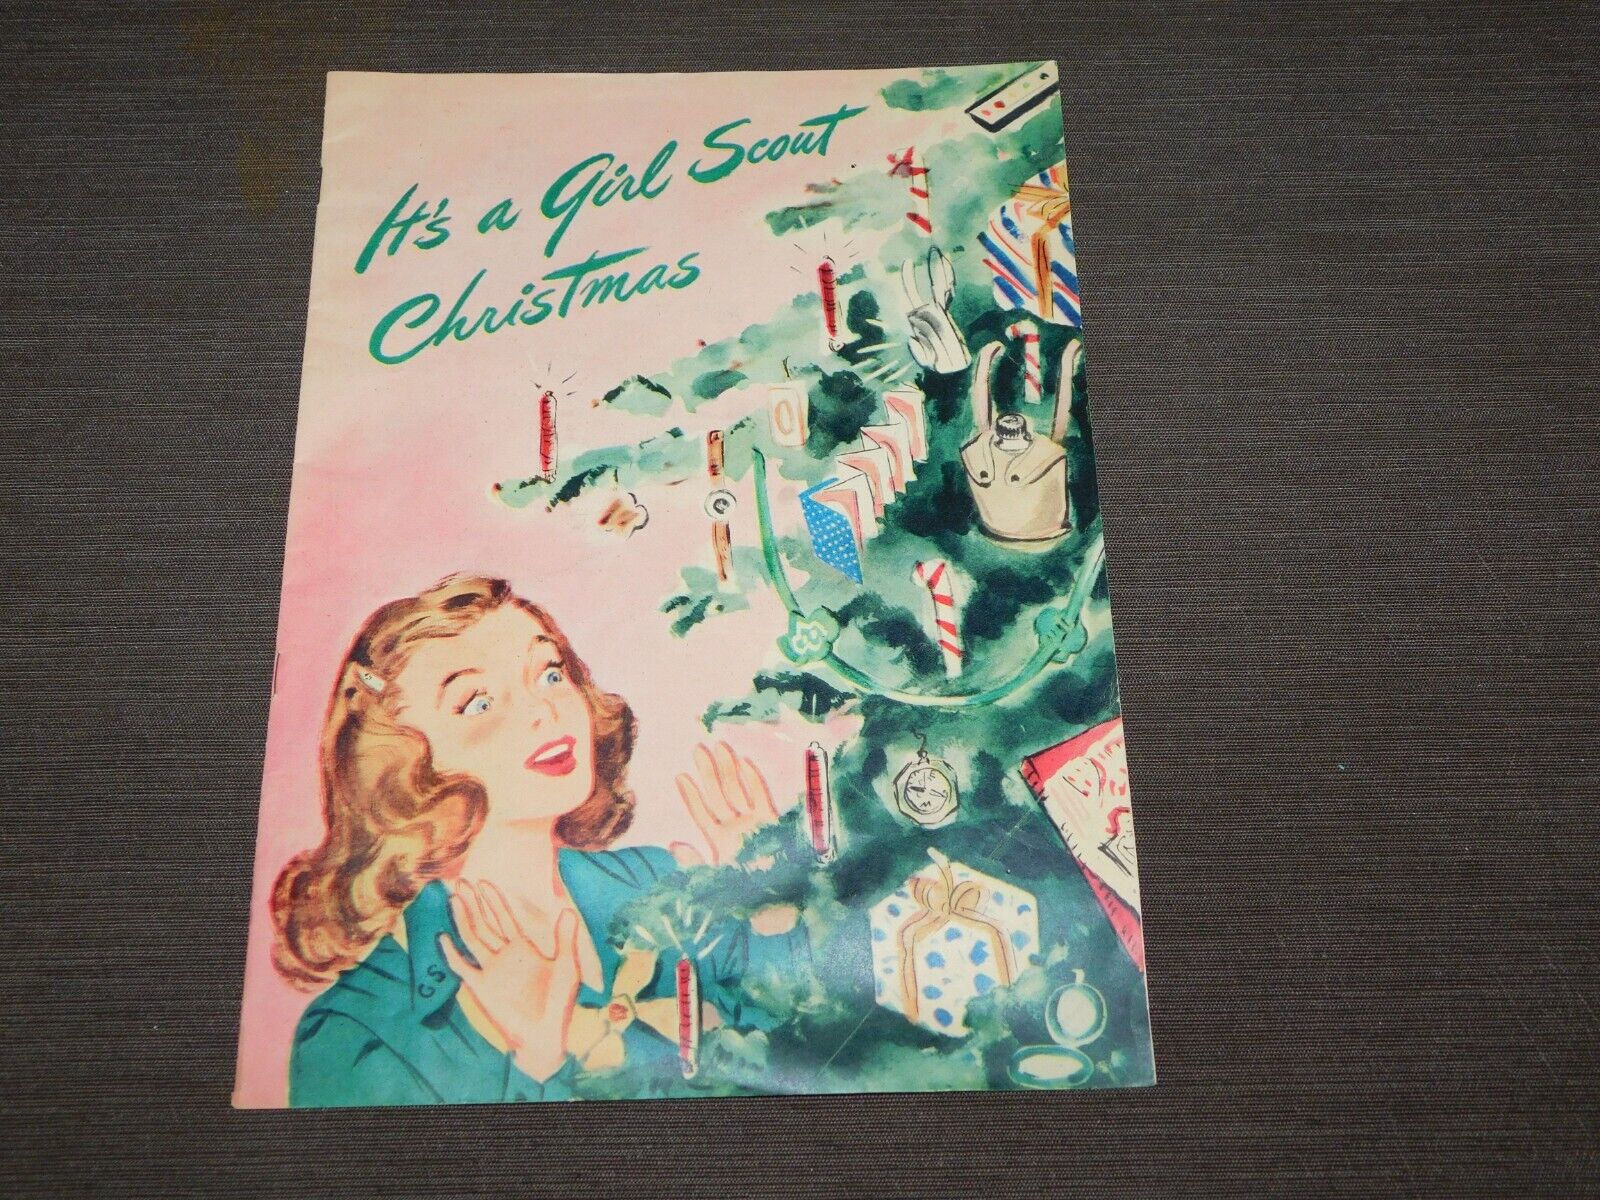 VINTAGE GSA  ITS A GIRL SCOUT CHRISTMAS UNIFORM EQUIPMENT PRICE GUIDE